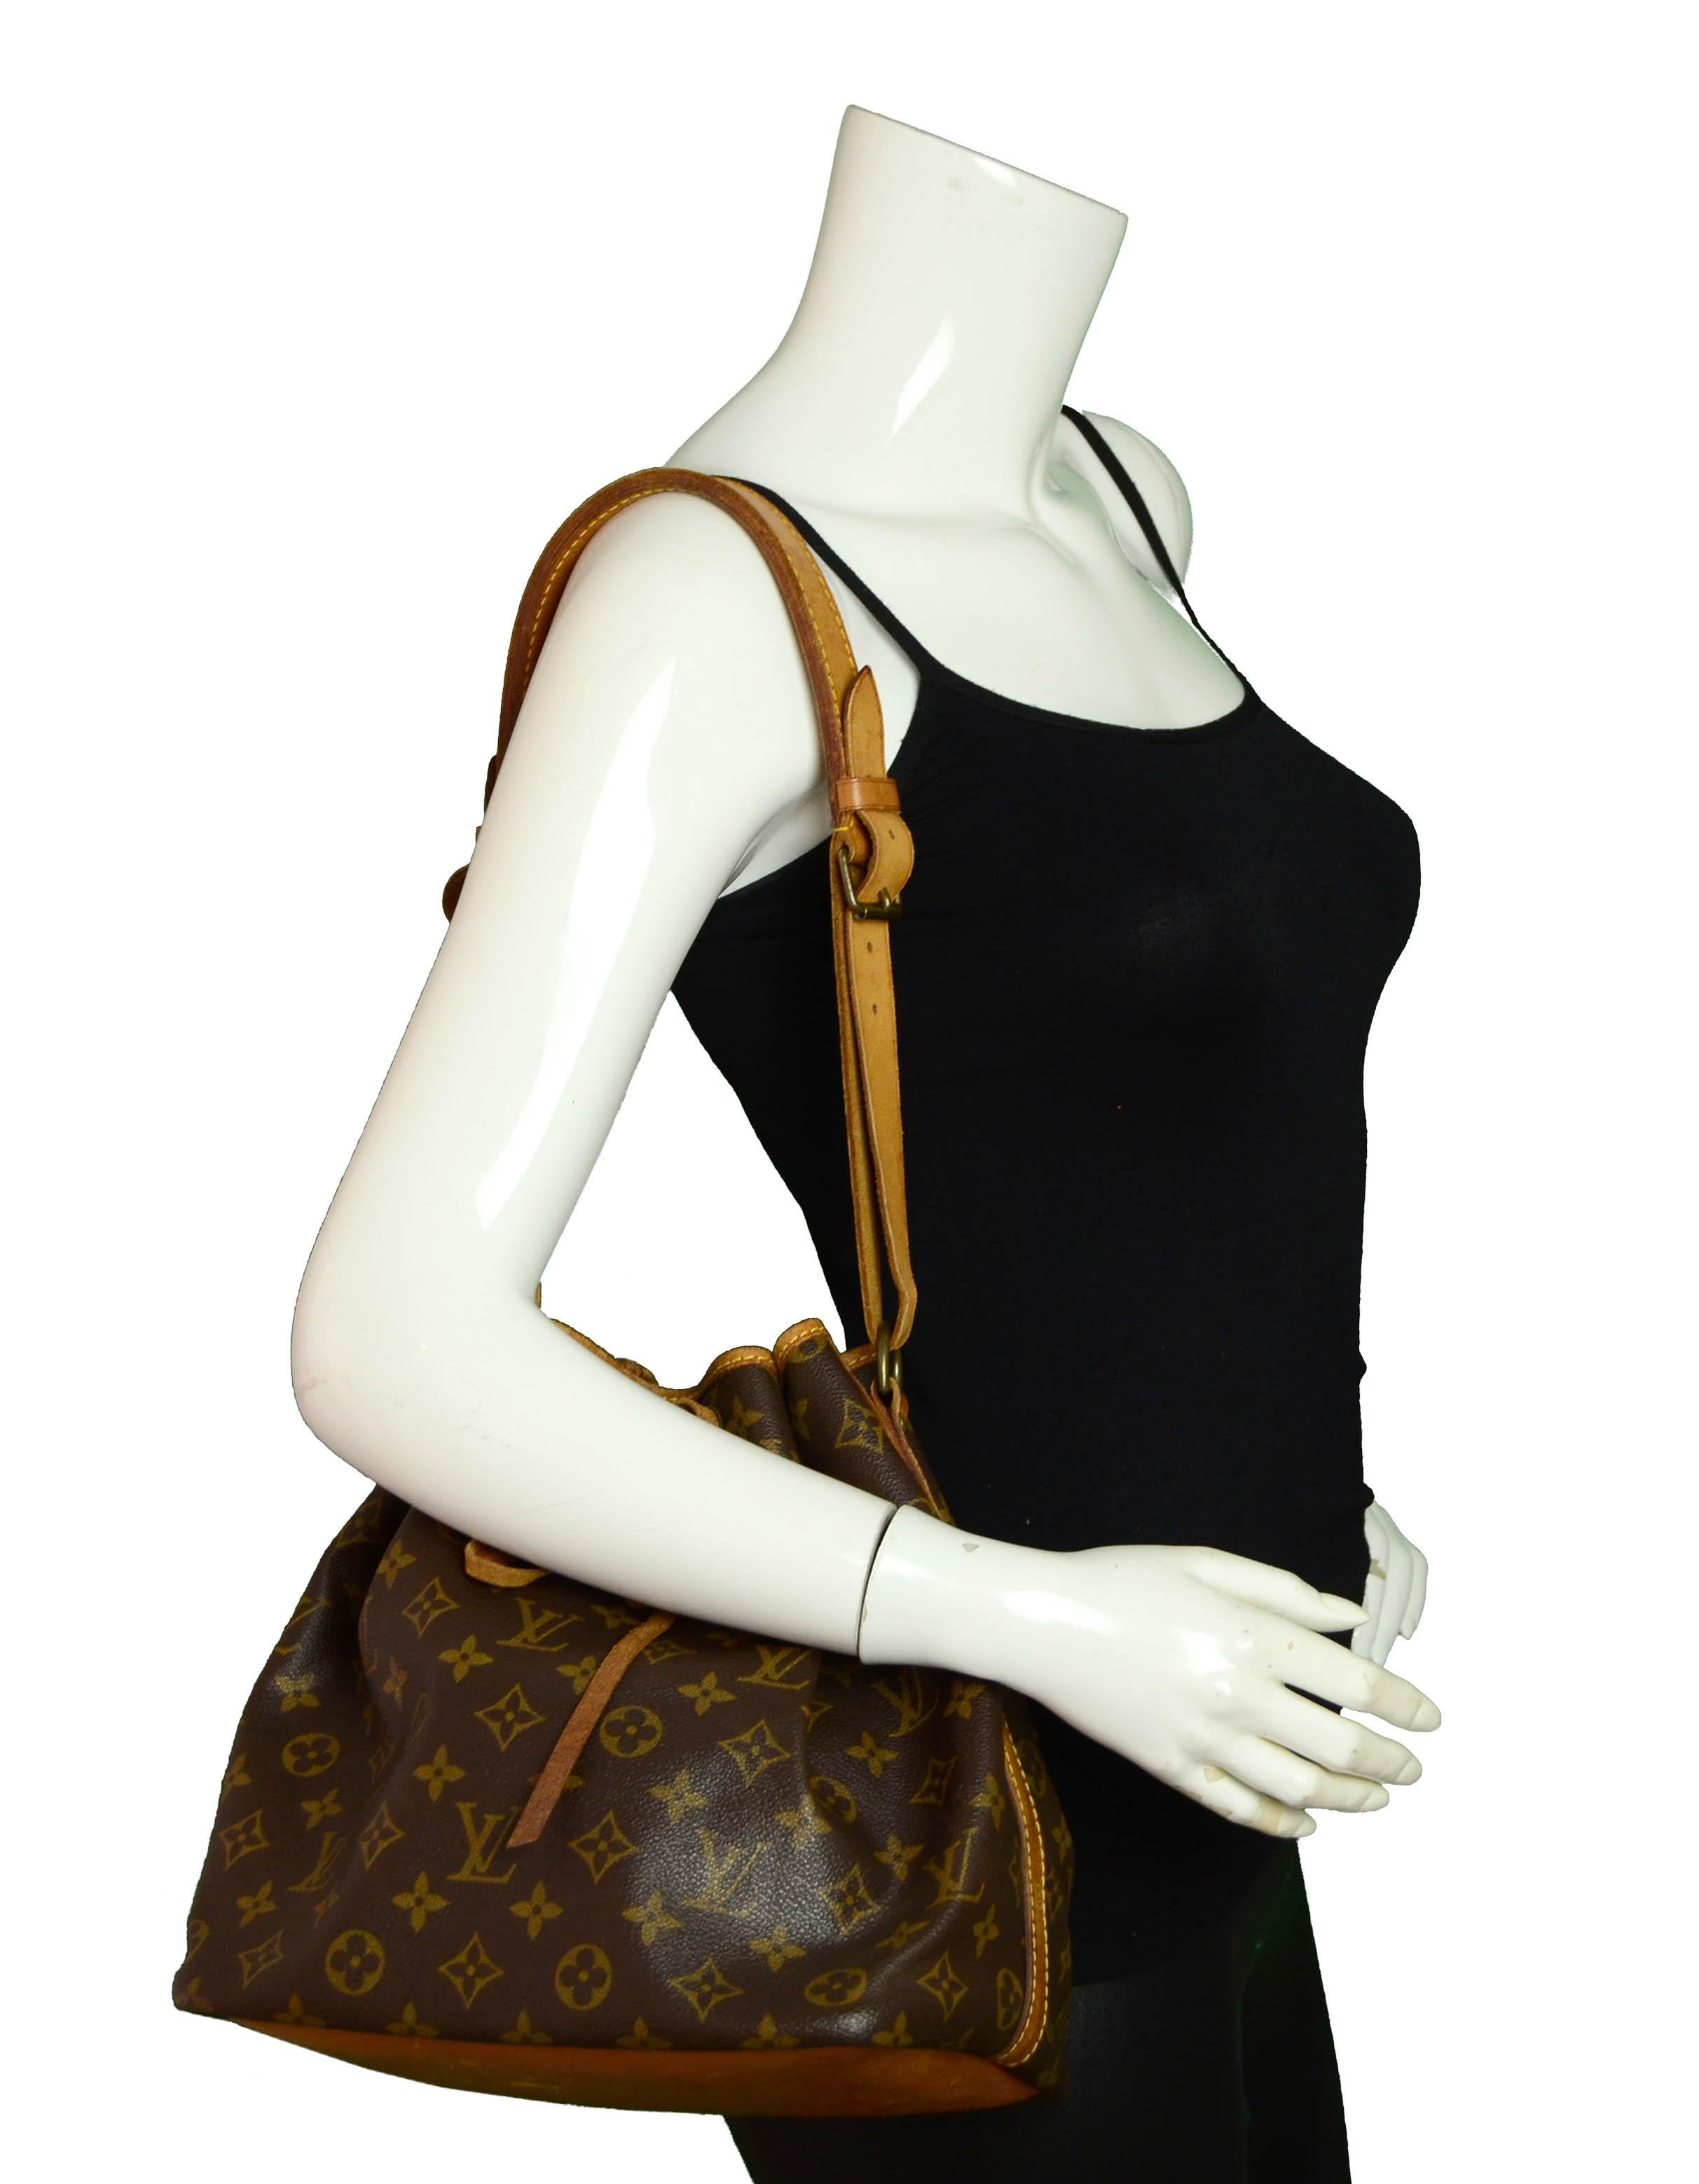 Louis Vuitton Monogram Petit Noe Bucket Bag

Made In: Malletier, France
Year of Production: 1989
Color: Brown monogram
Hardware: Goldtone
Materials: Coated Canvas
Lining: Canvas
Closure/Opening: Drawstring
Exterior Condition: Good - wear & staining